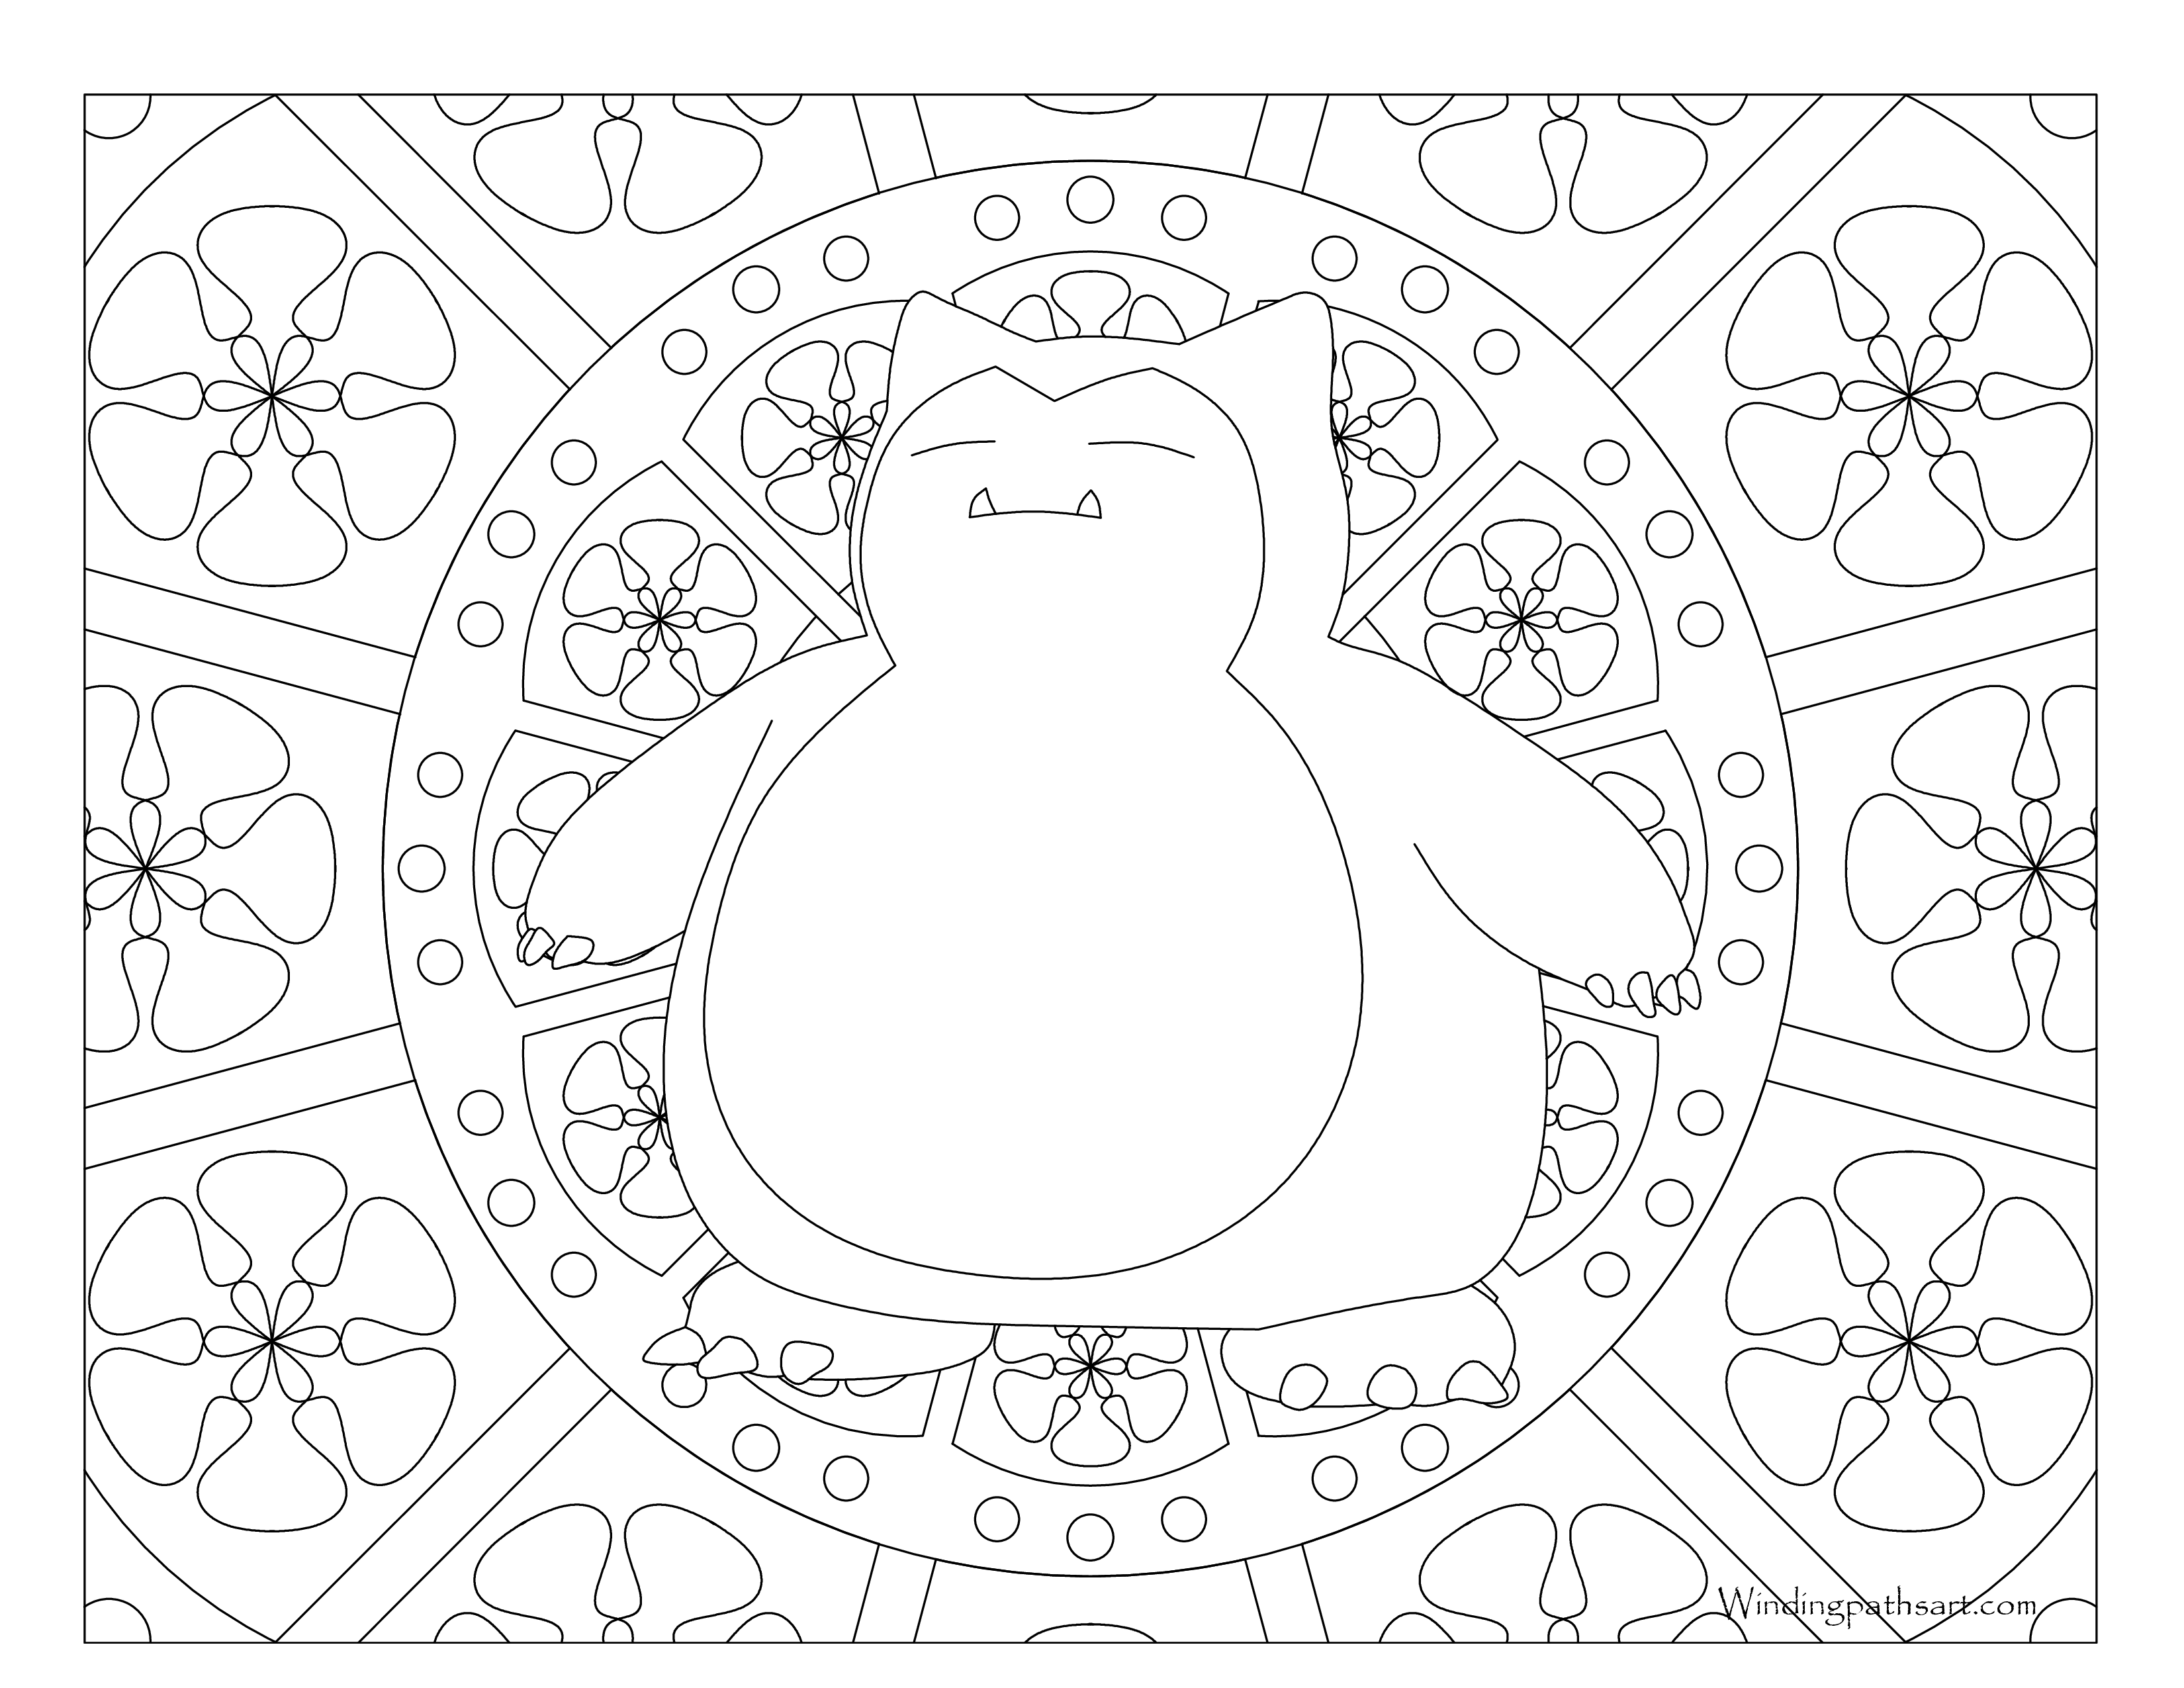 Pikachu clipart colouring page, Pikachu colouring page Transparent FREE